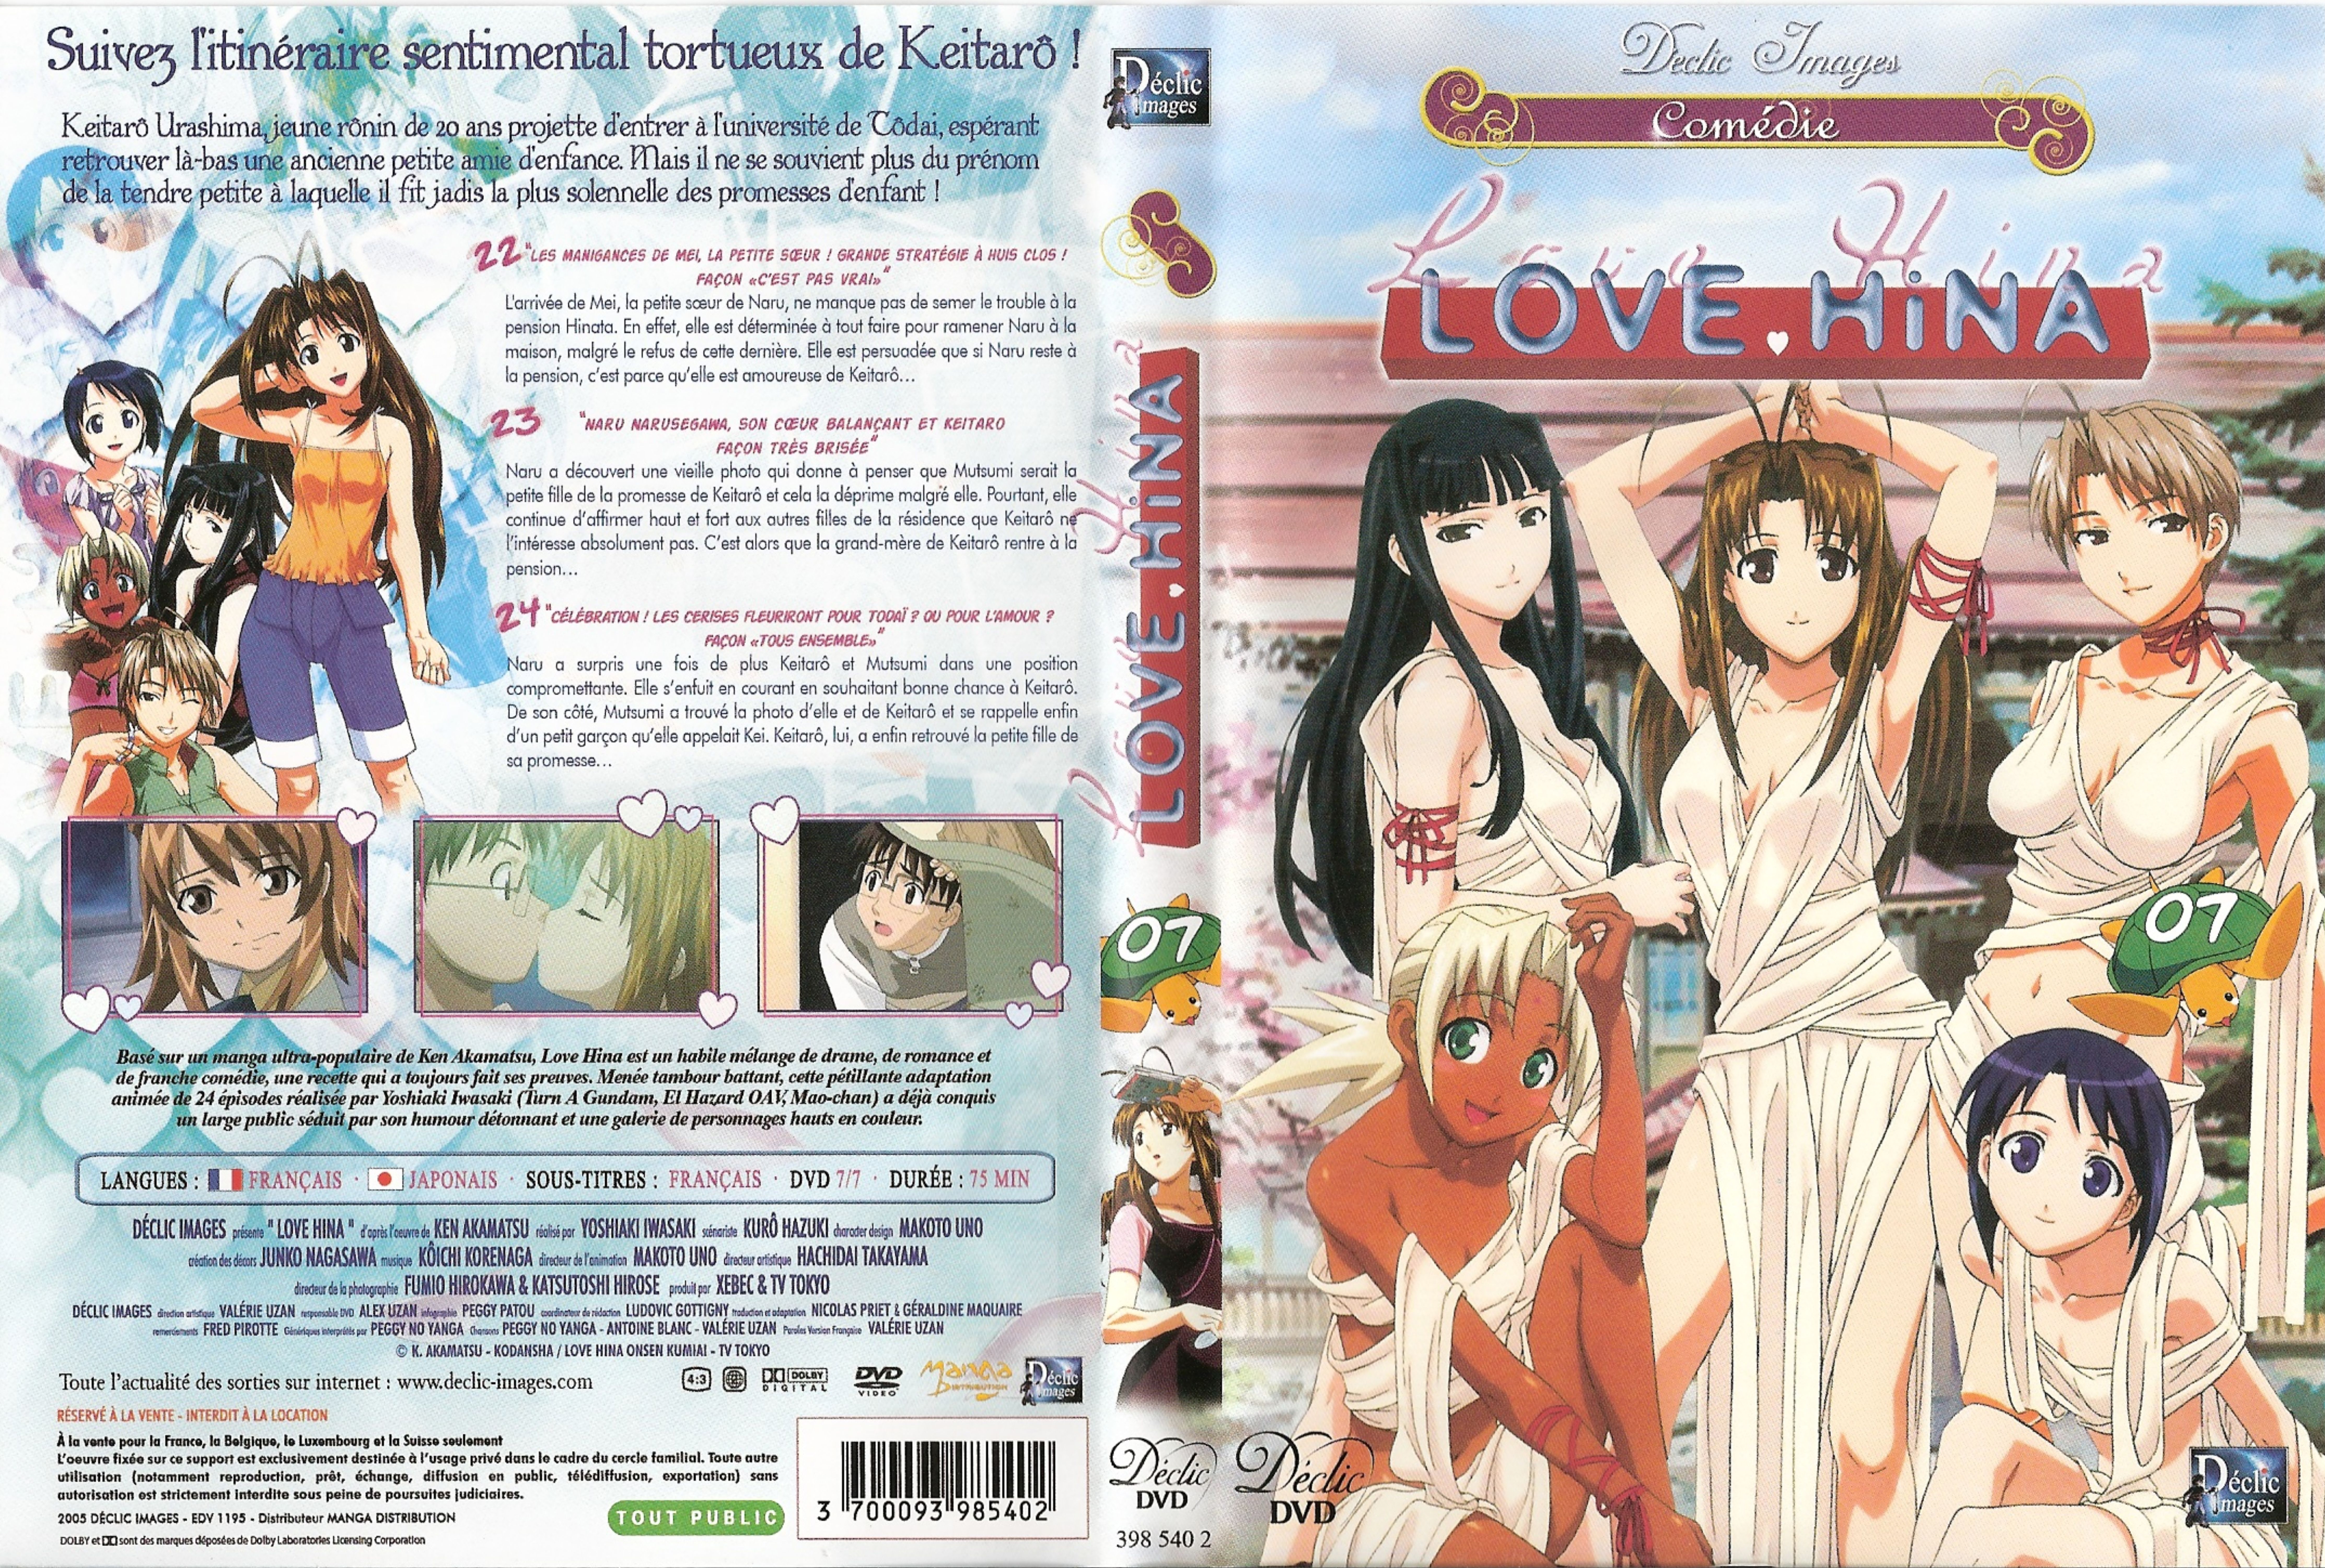 Jaquette DVD Love Hina DVD 07